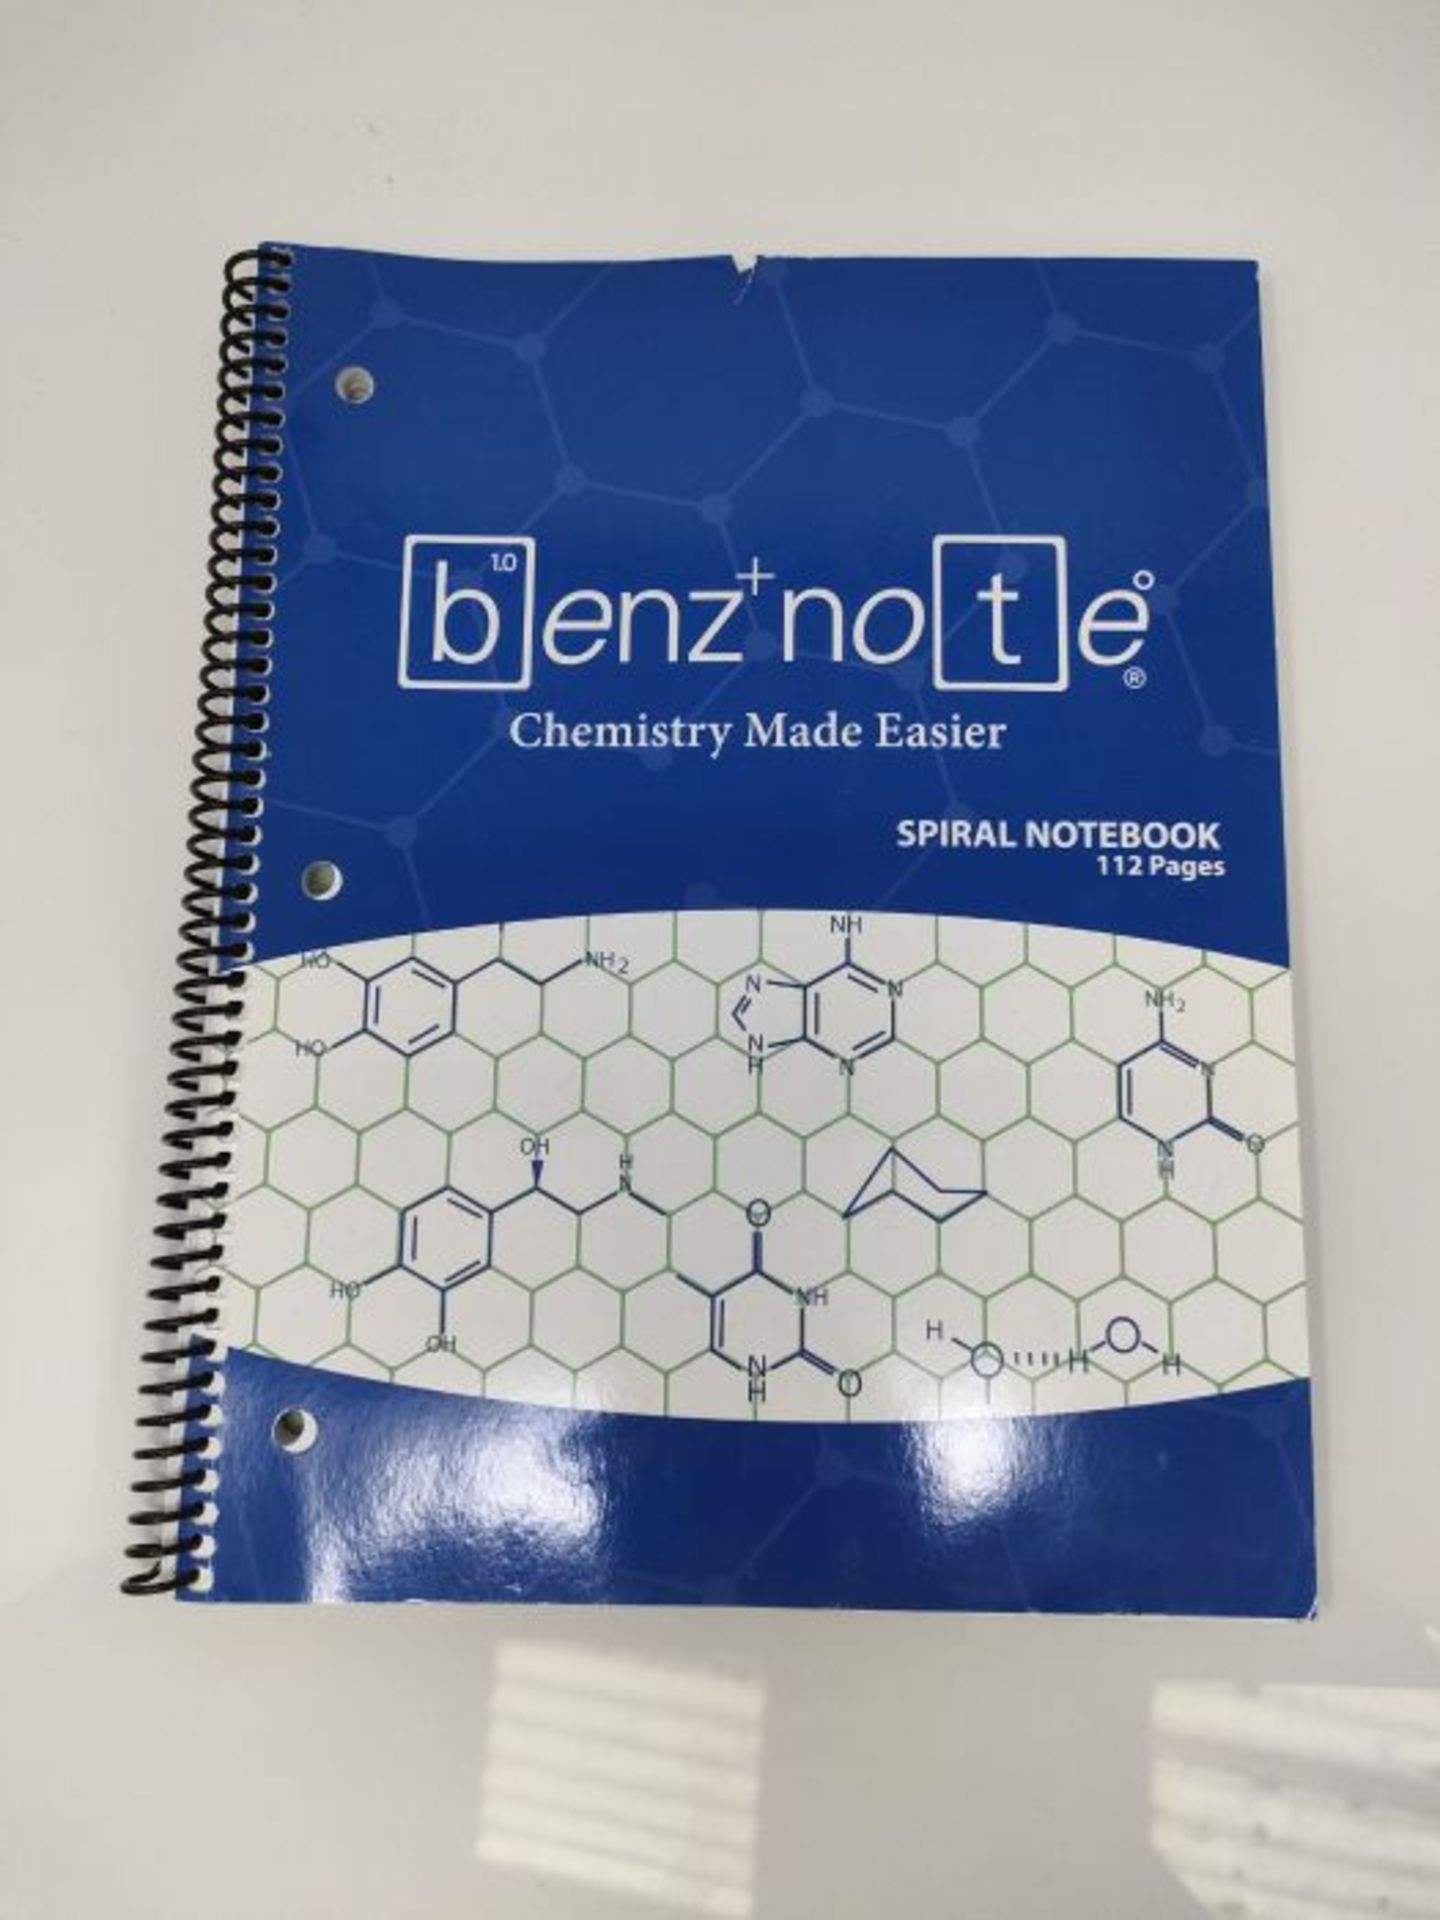 BENZNOTE, Spiral Notebook, for Organic and Bio Chemistry, 8-1/2" x 11", Hexagonal Grap - Image 2 of 2